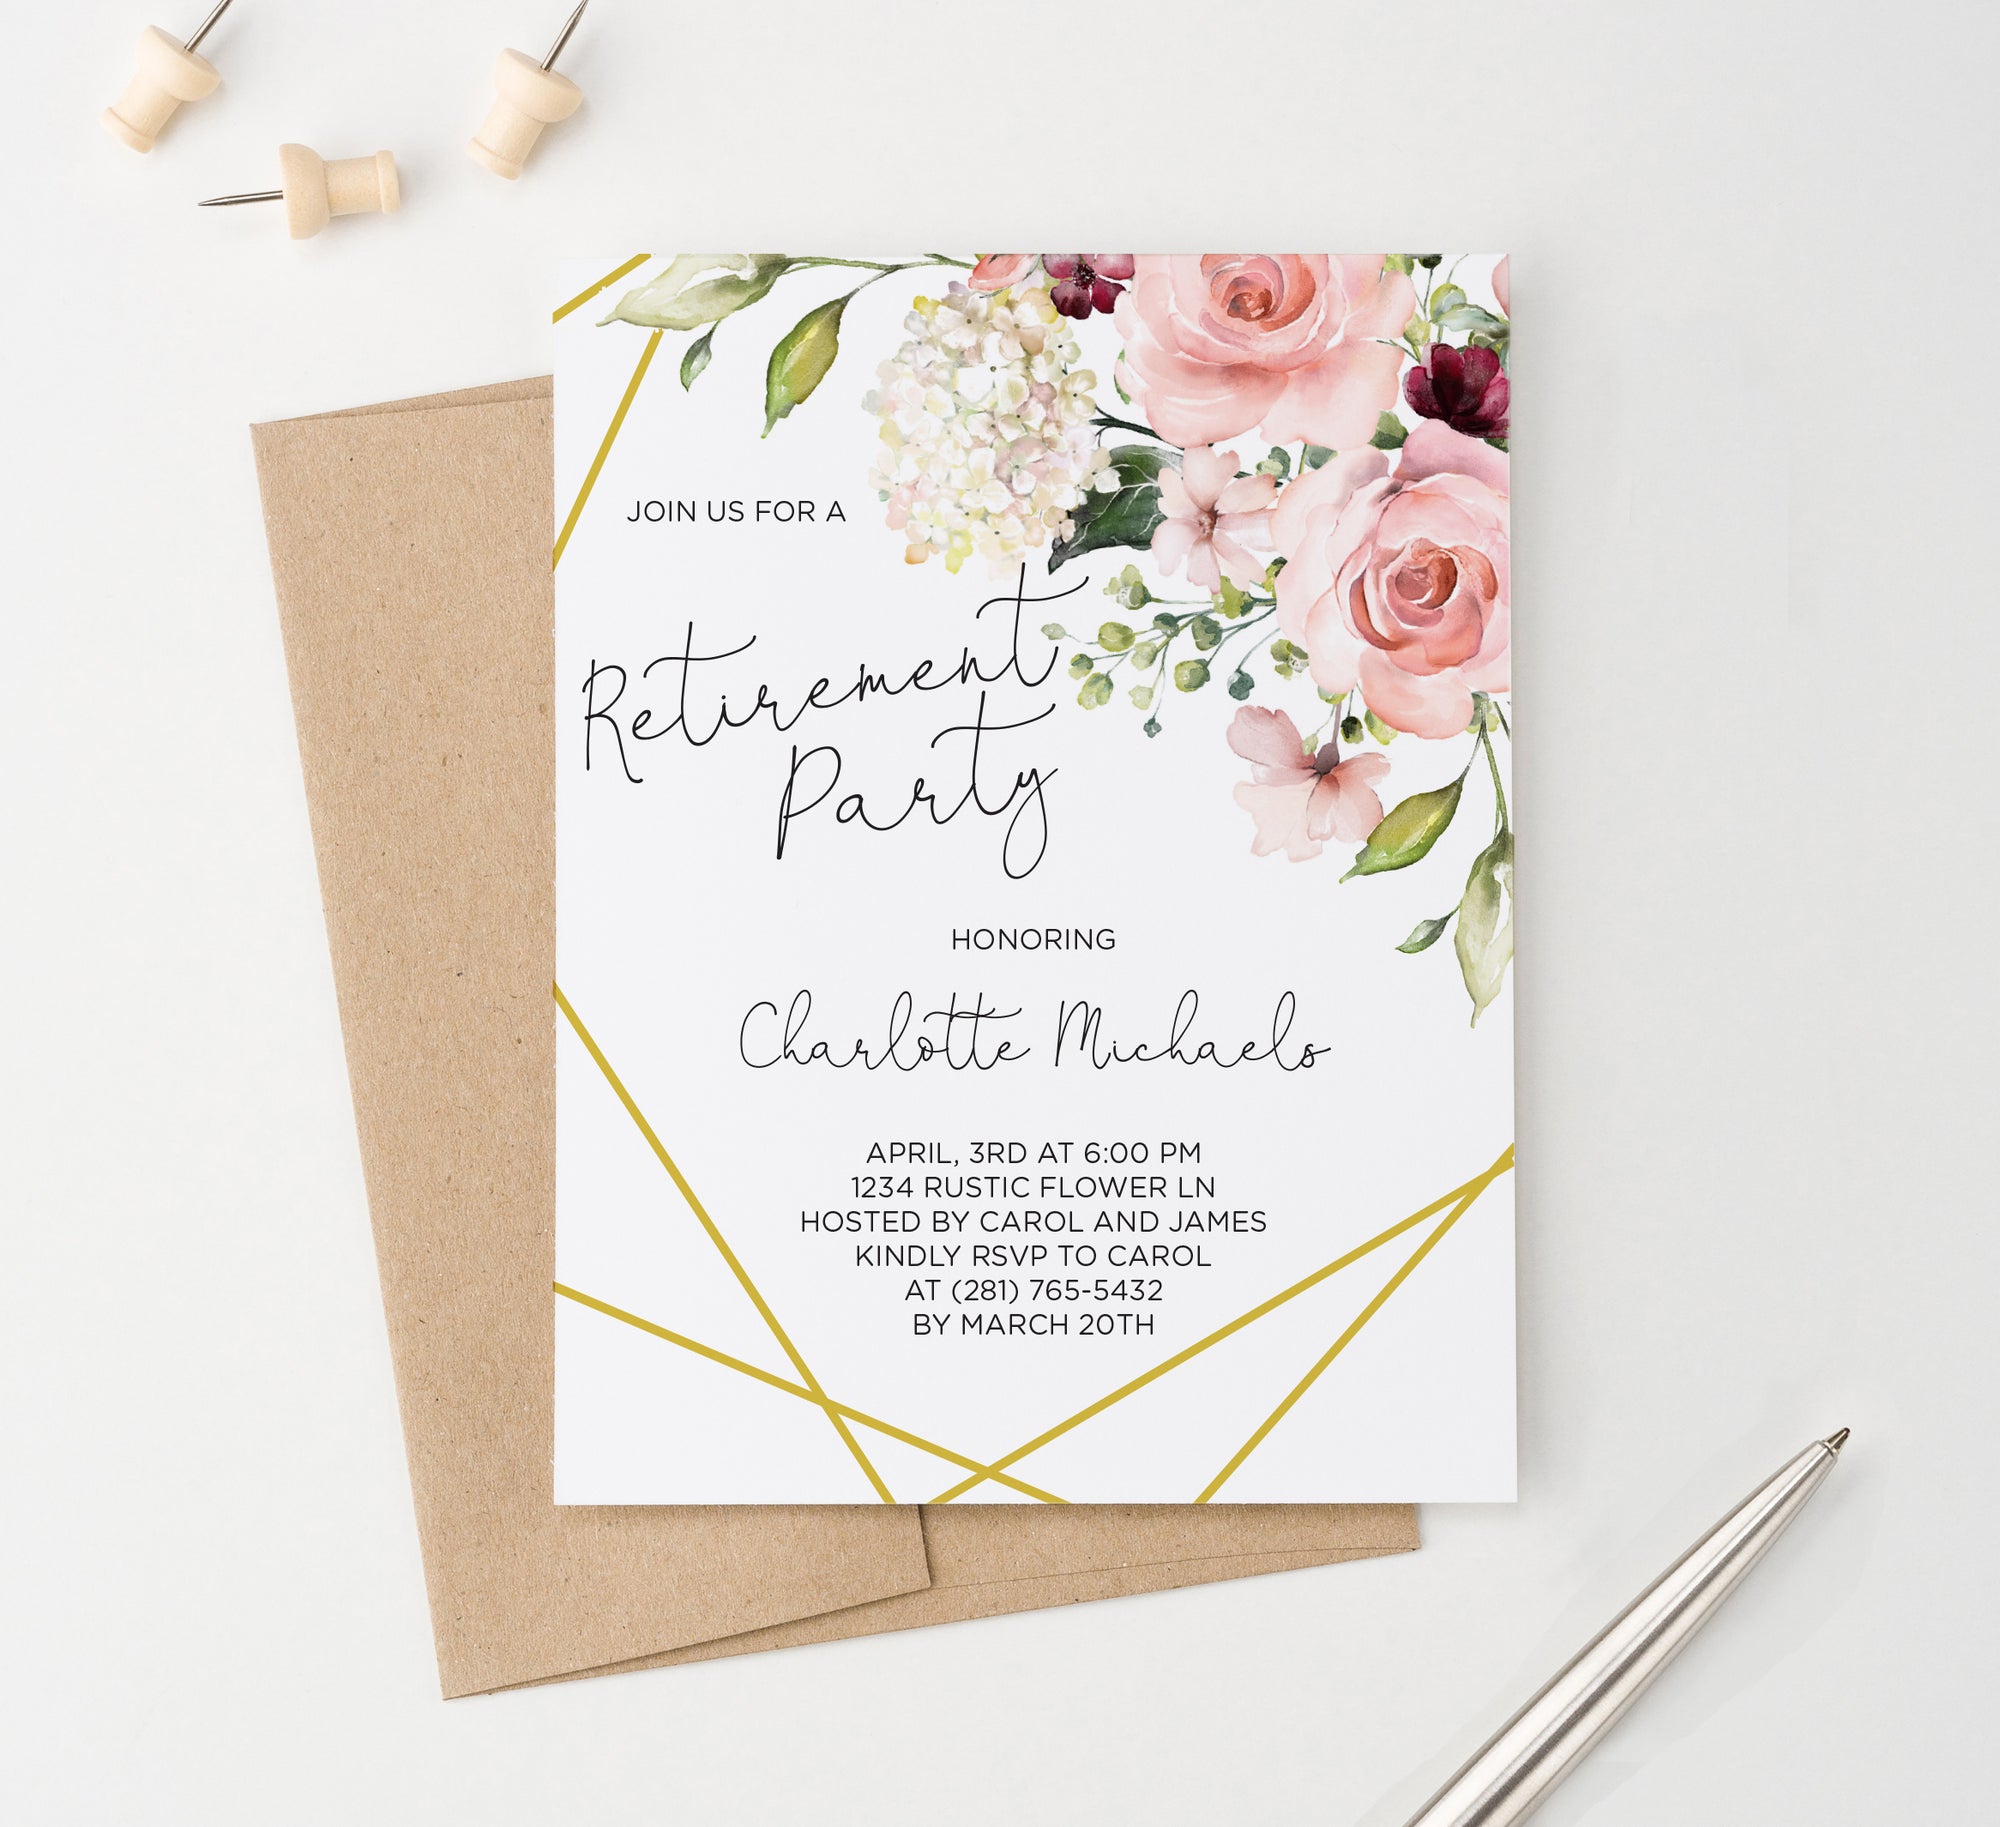 Elegant Personalized Retirement Party Invitations With Floral Corner